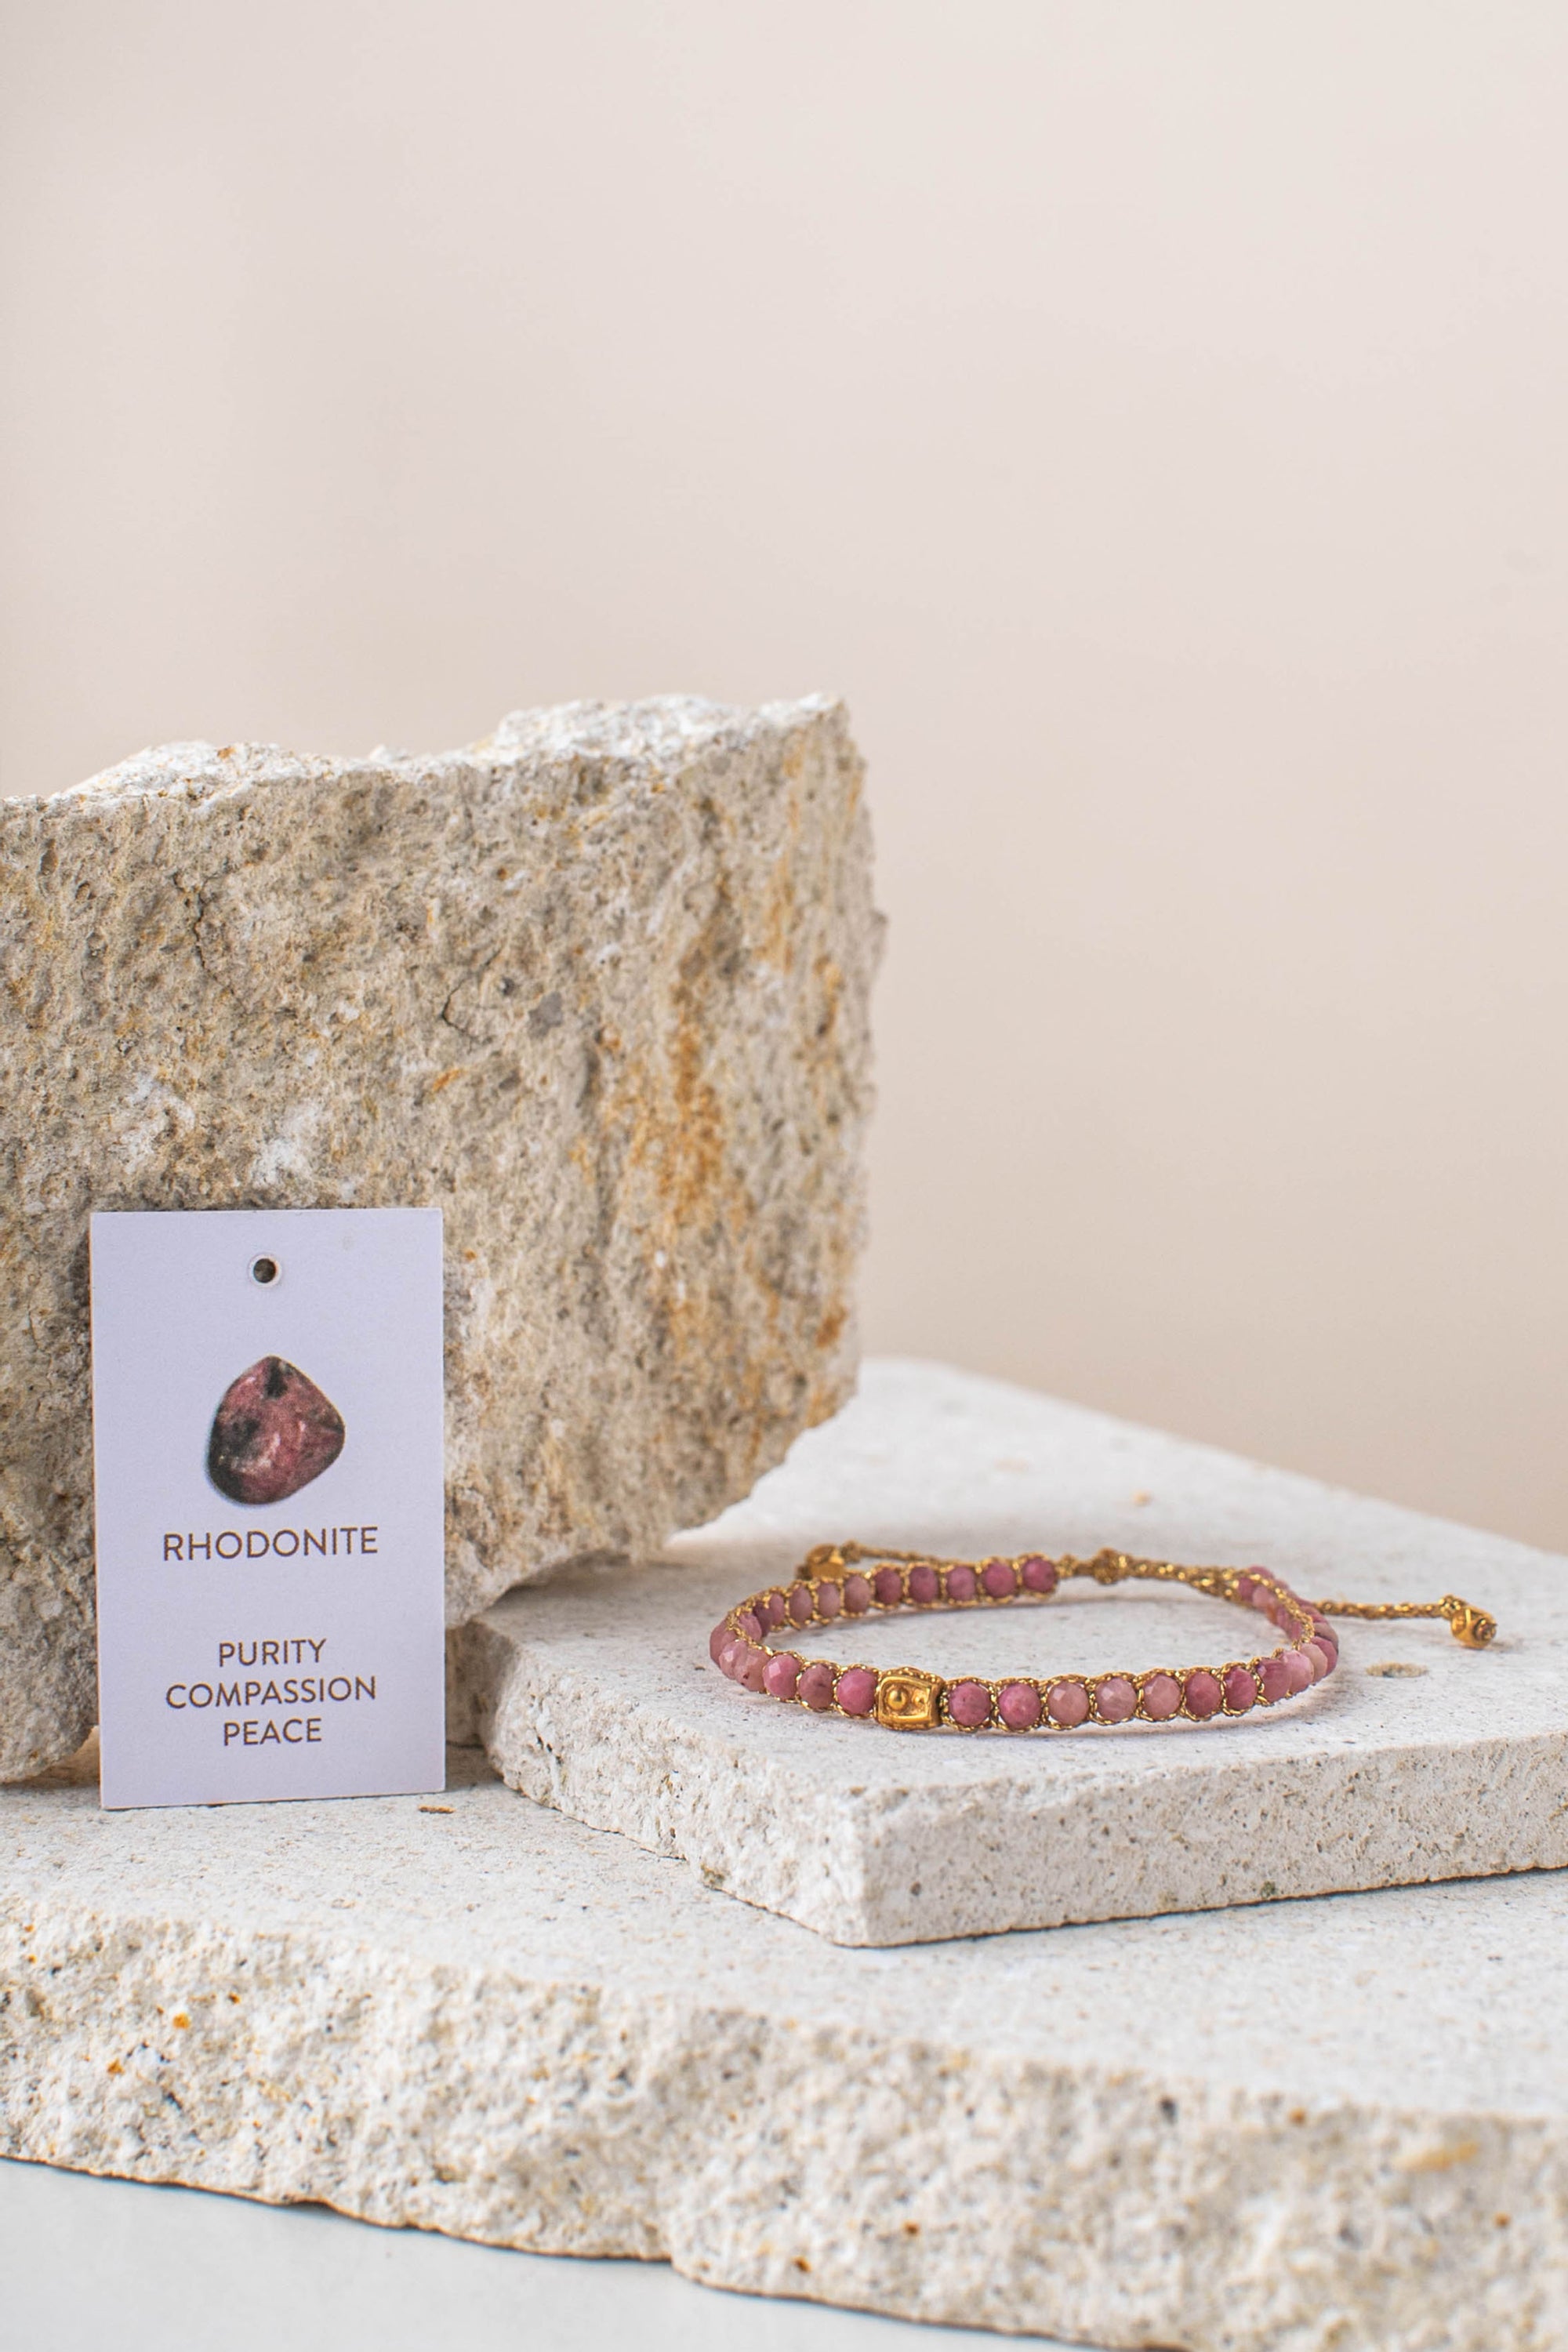 Rhodonite Bracelet, Stones For Purity, Compassion And Peace